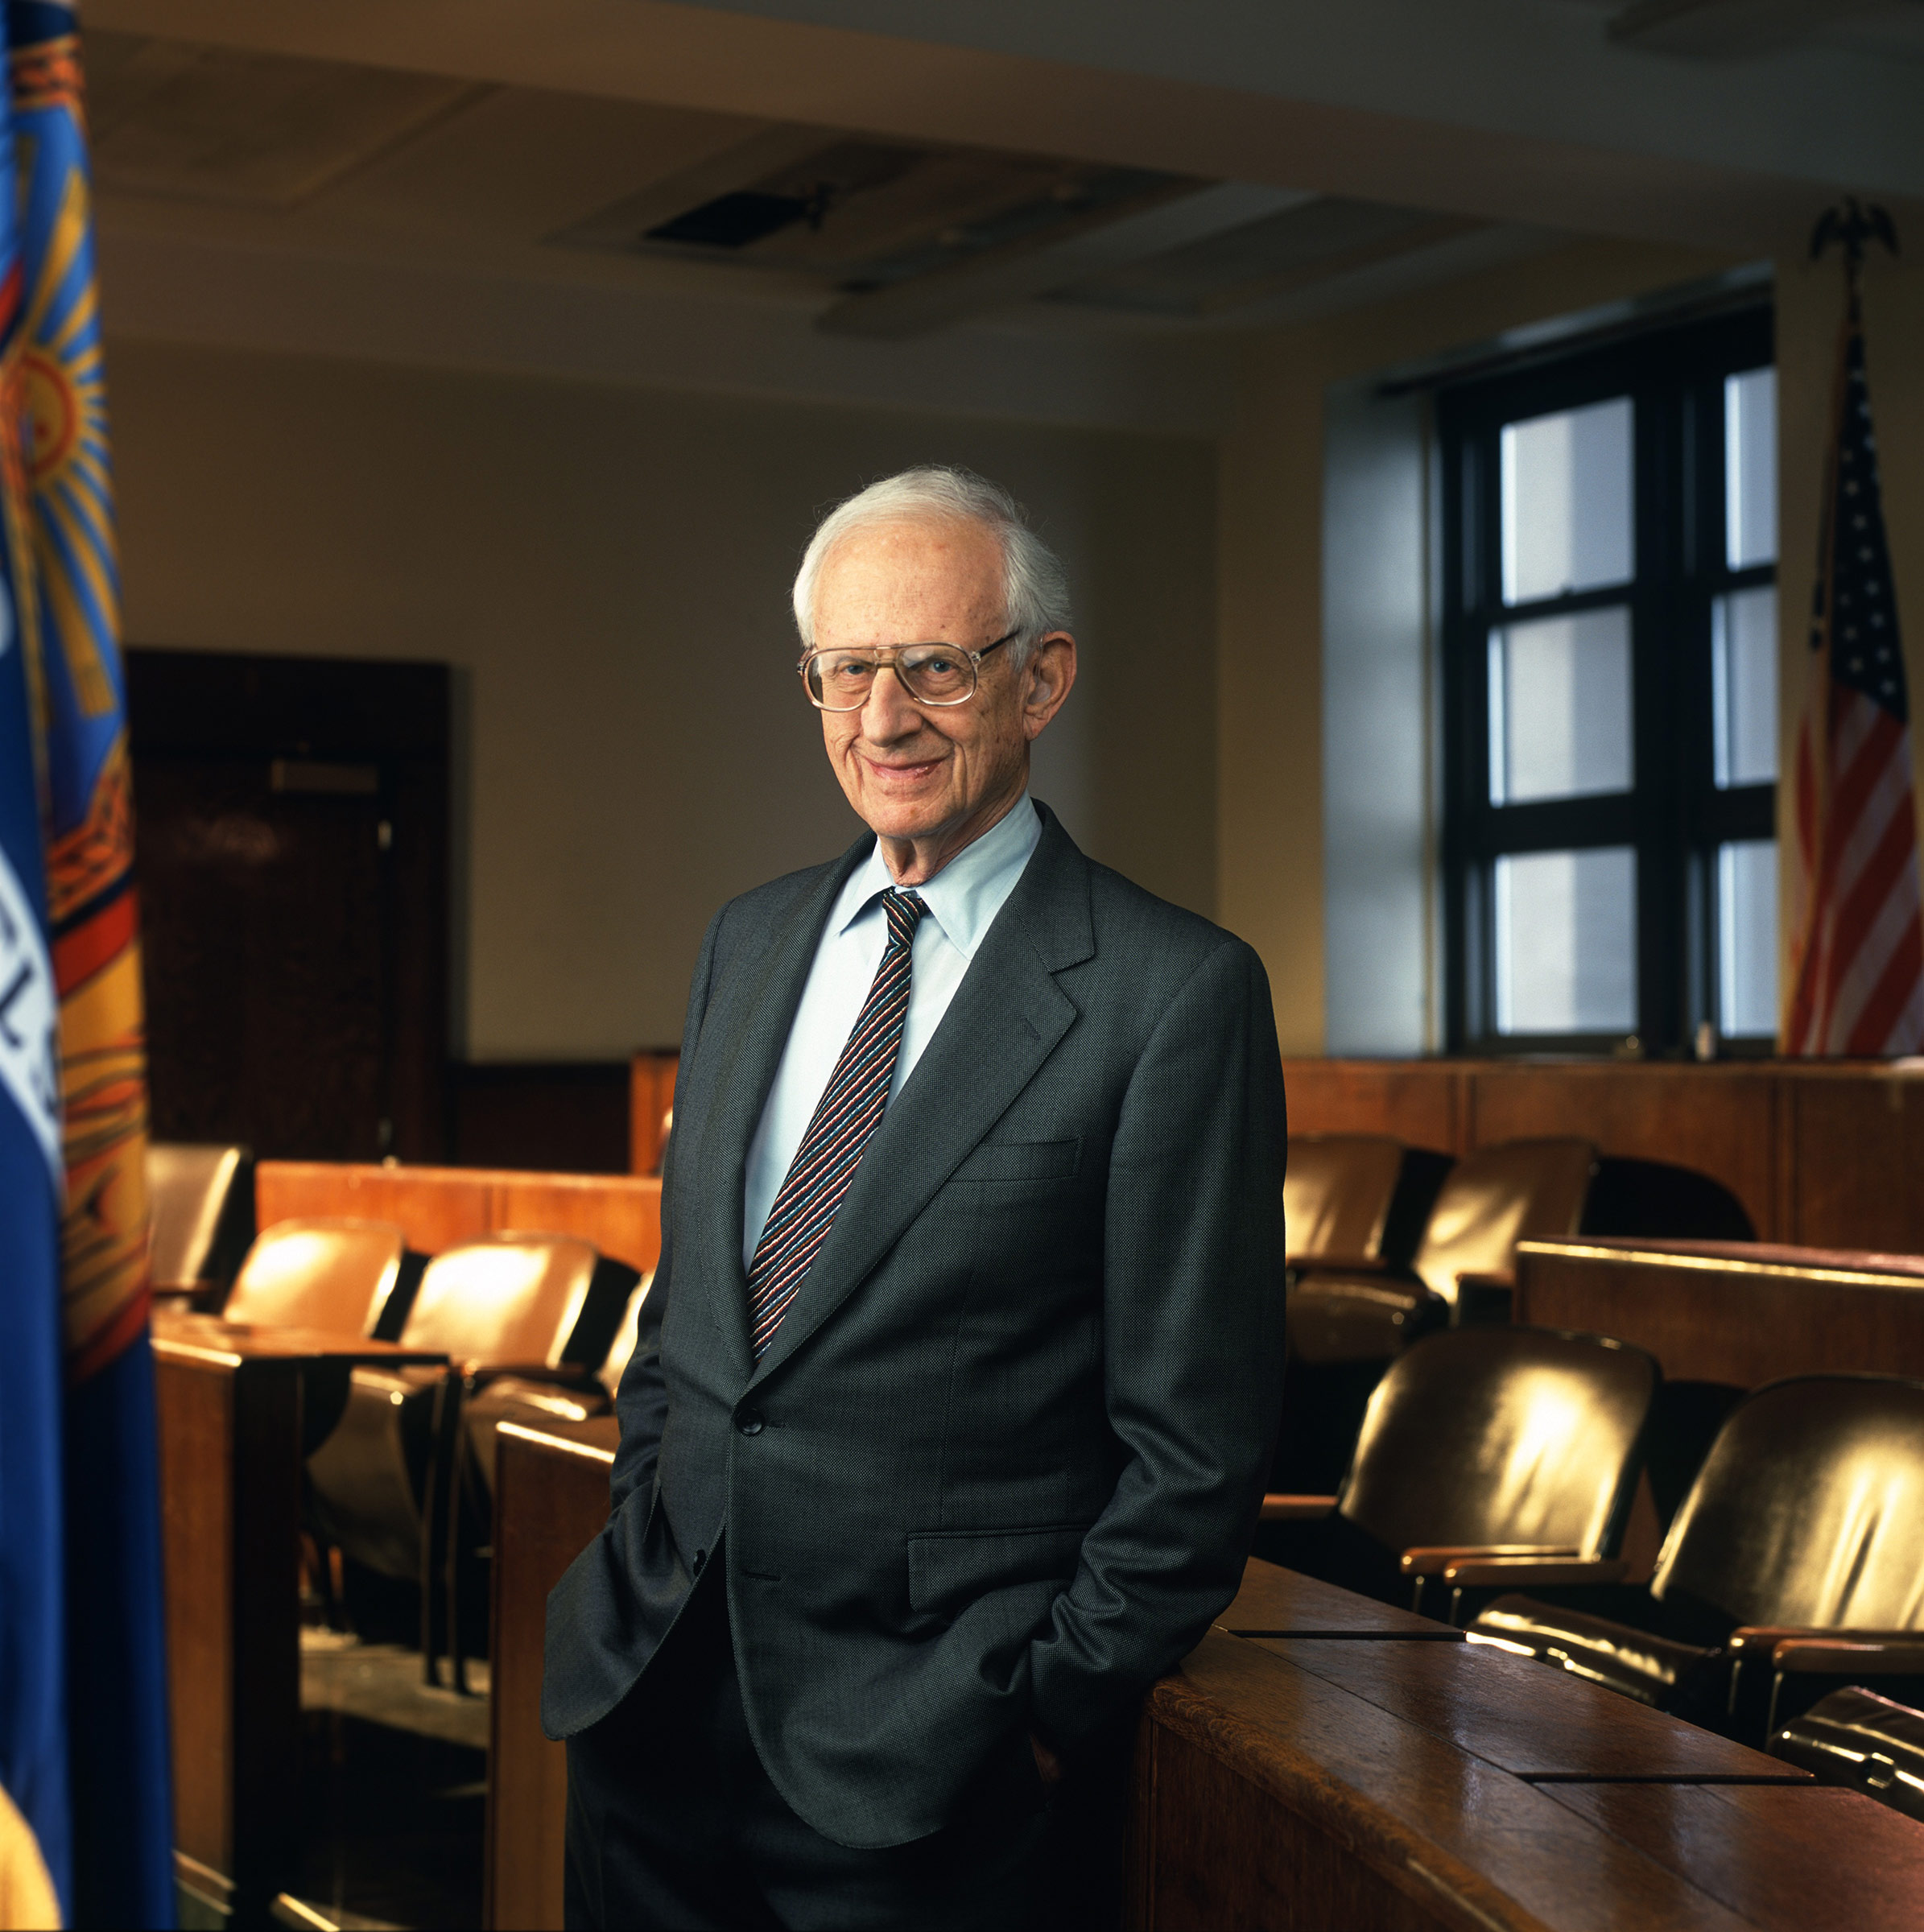 Morgenthau, the longest-serving Manhattan district attorney, poses for a portrait in a New York City courtroom on April 26, 2000.